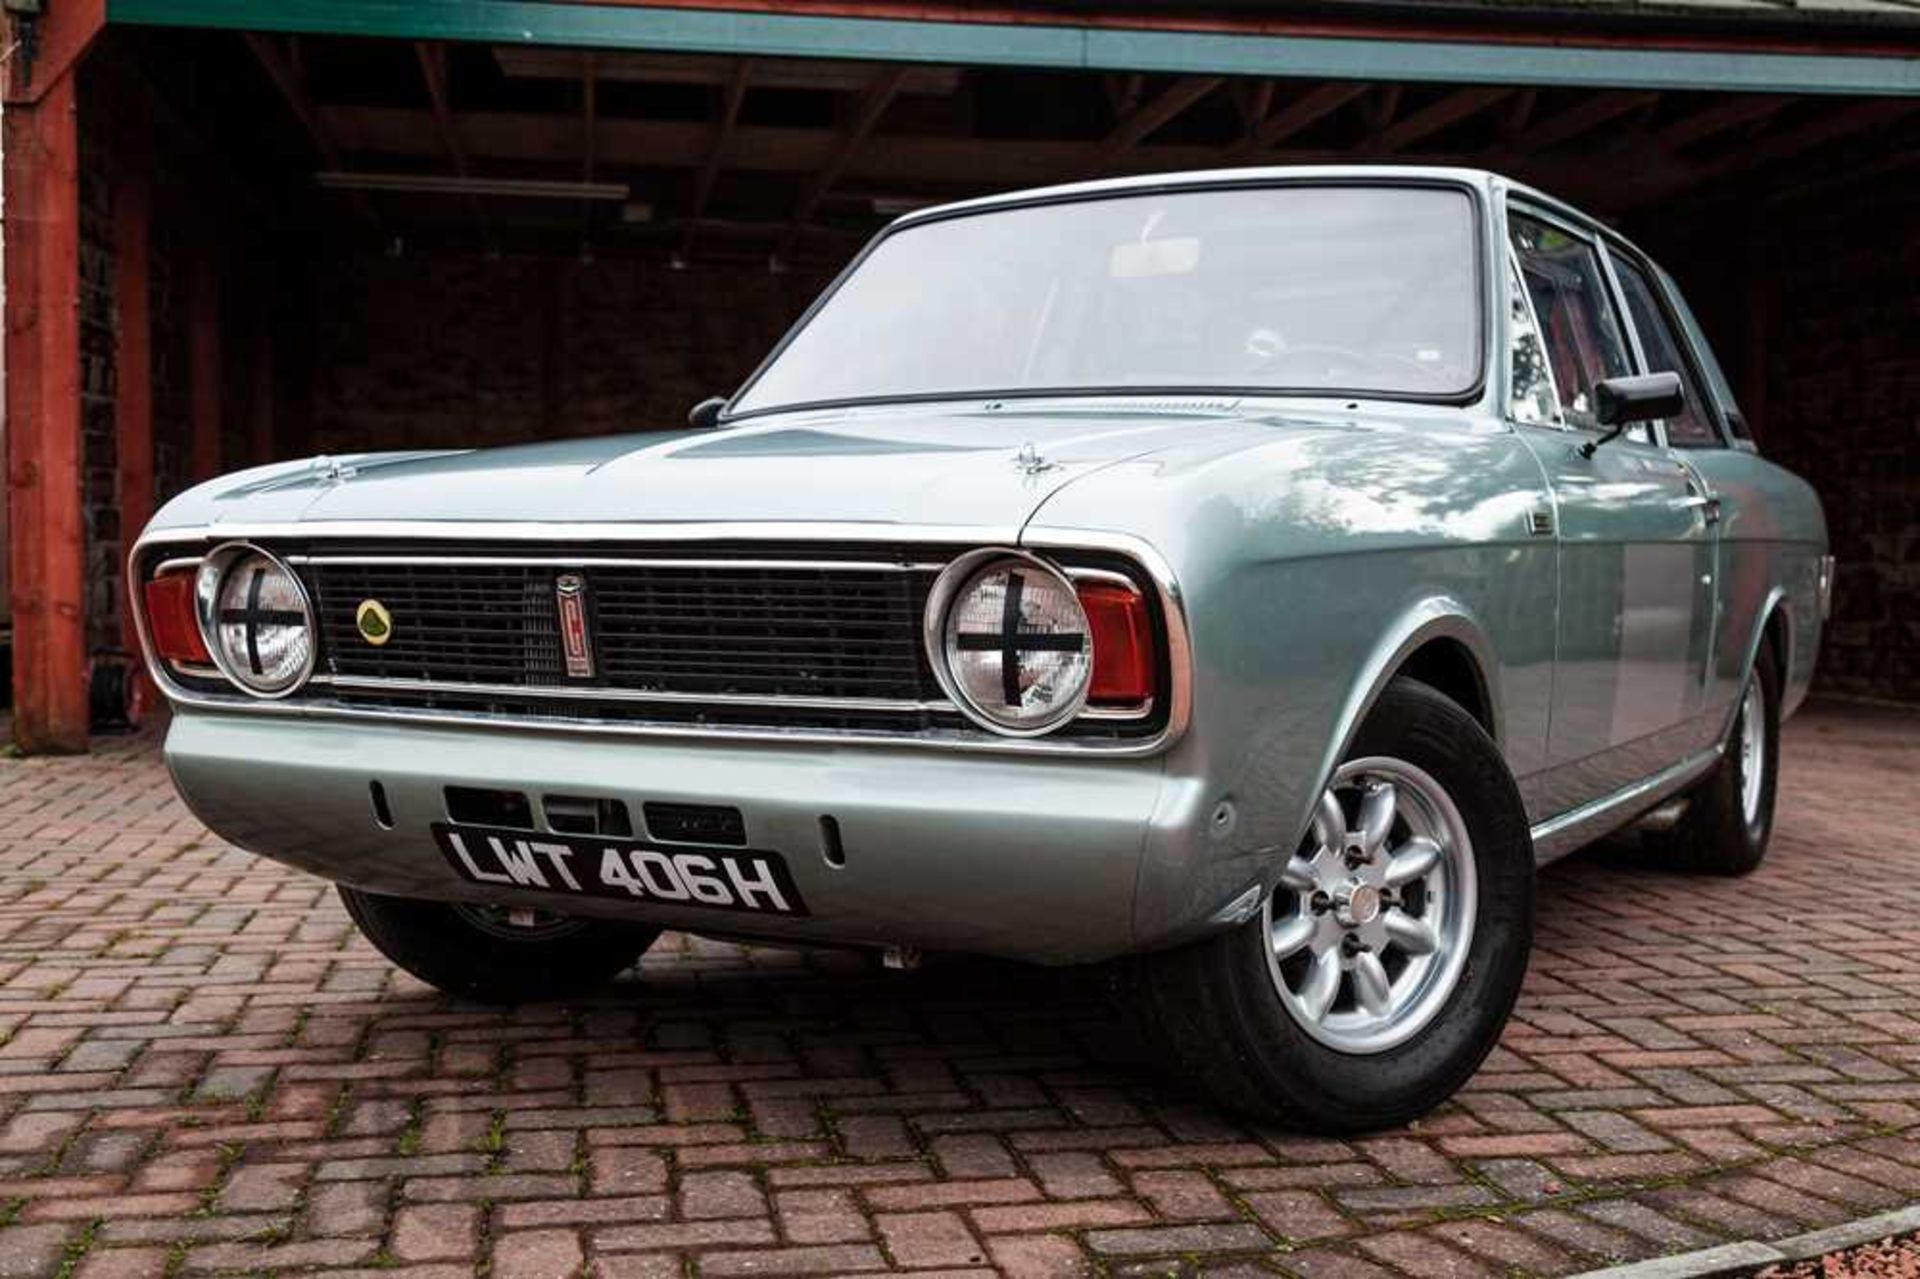 1969 Ford Cortina 'Lotus' Competition Saloon Powered by a 1598cc FIA-legal Lotus Twin-Cam with Twin - Image 5 of 55